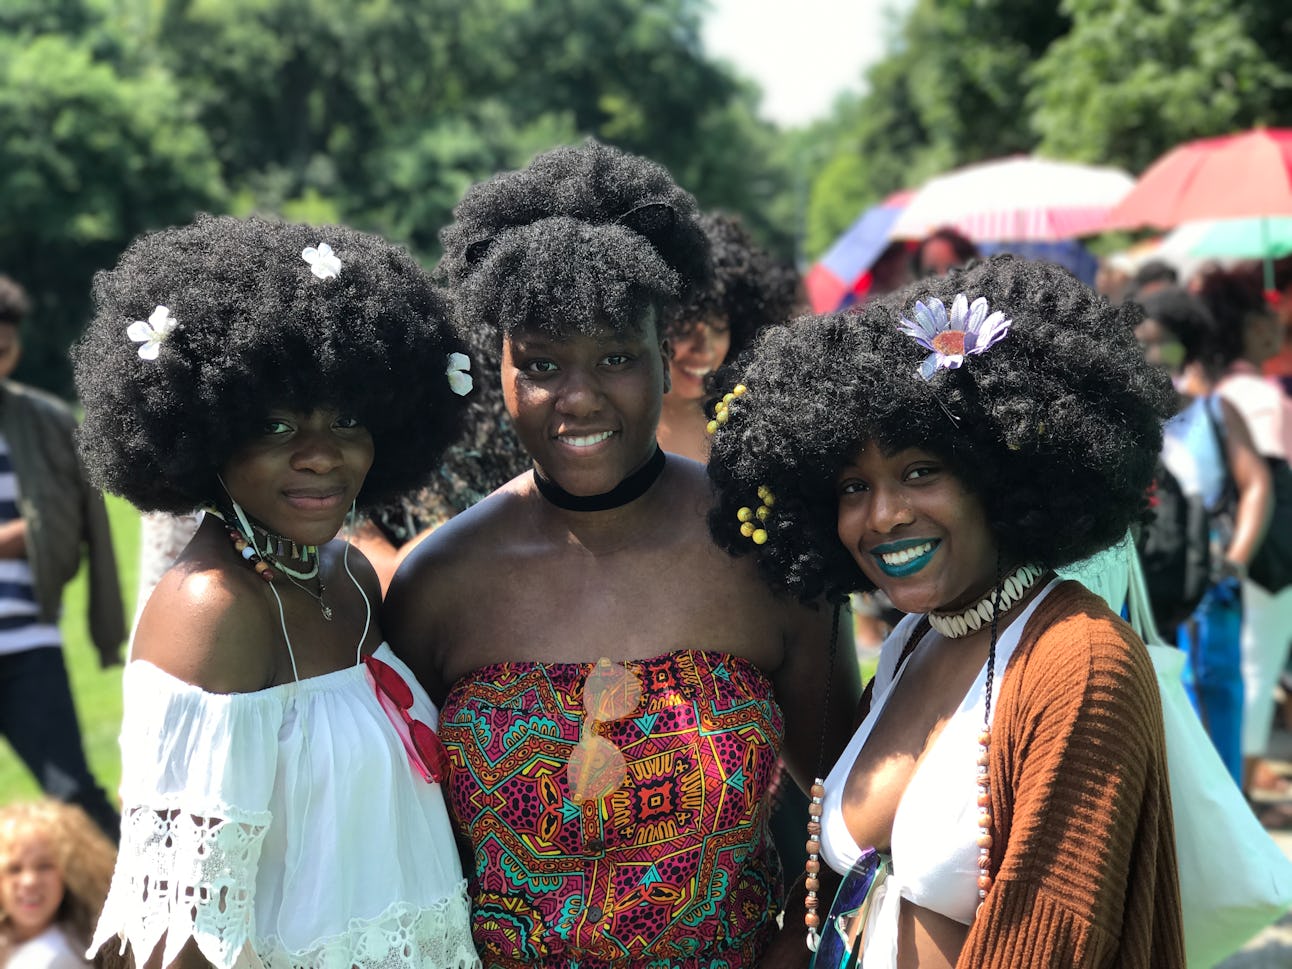 Brooklyn’s Curlfest celebrates natural hair during 4th annual beauty